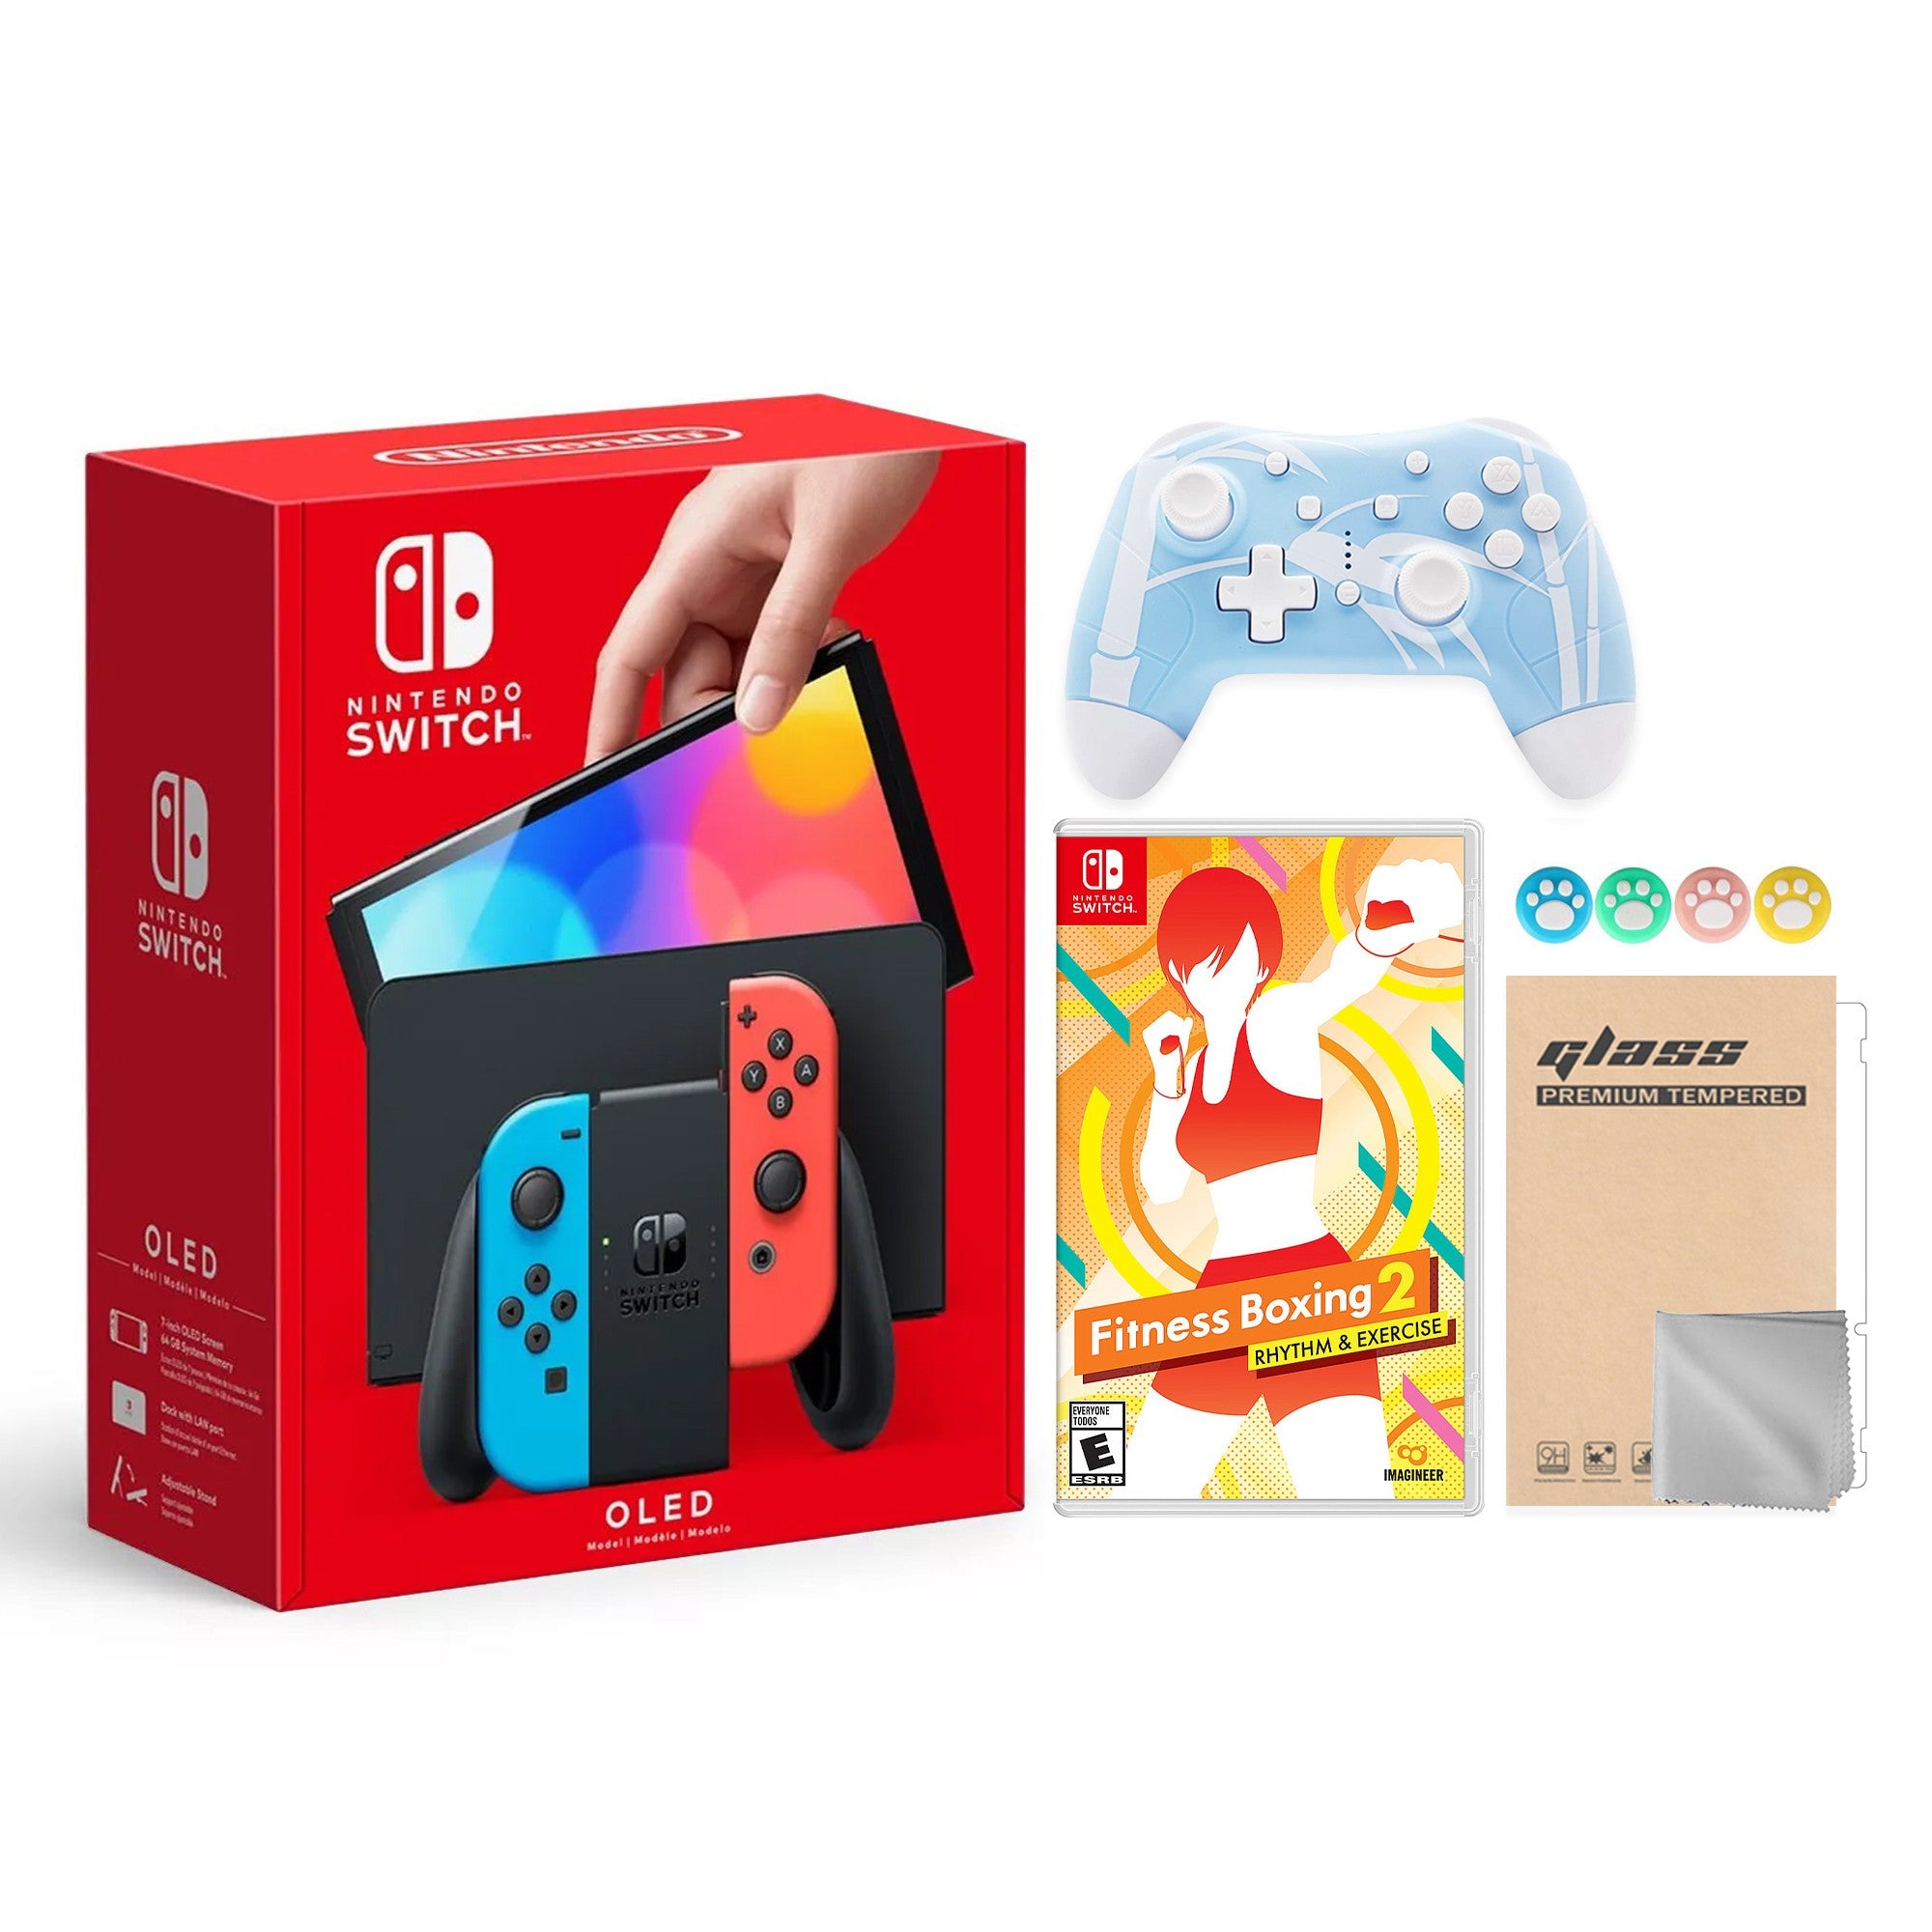 2022 New Nintendo Switch OLED Model Neon Red & Blue Joy Con 64GB Console HD Screen & LAN-Port Dock with Fitness Boxing 2: Rhythm & Exercise, Mytrix Wireless Pro Controller and Accessories